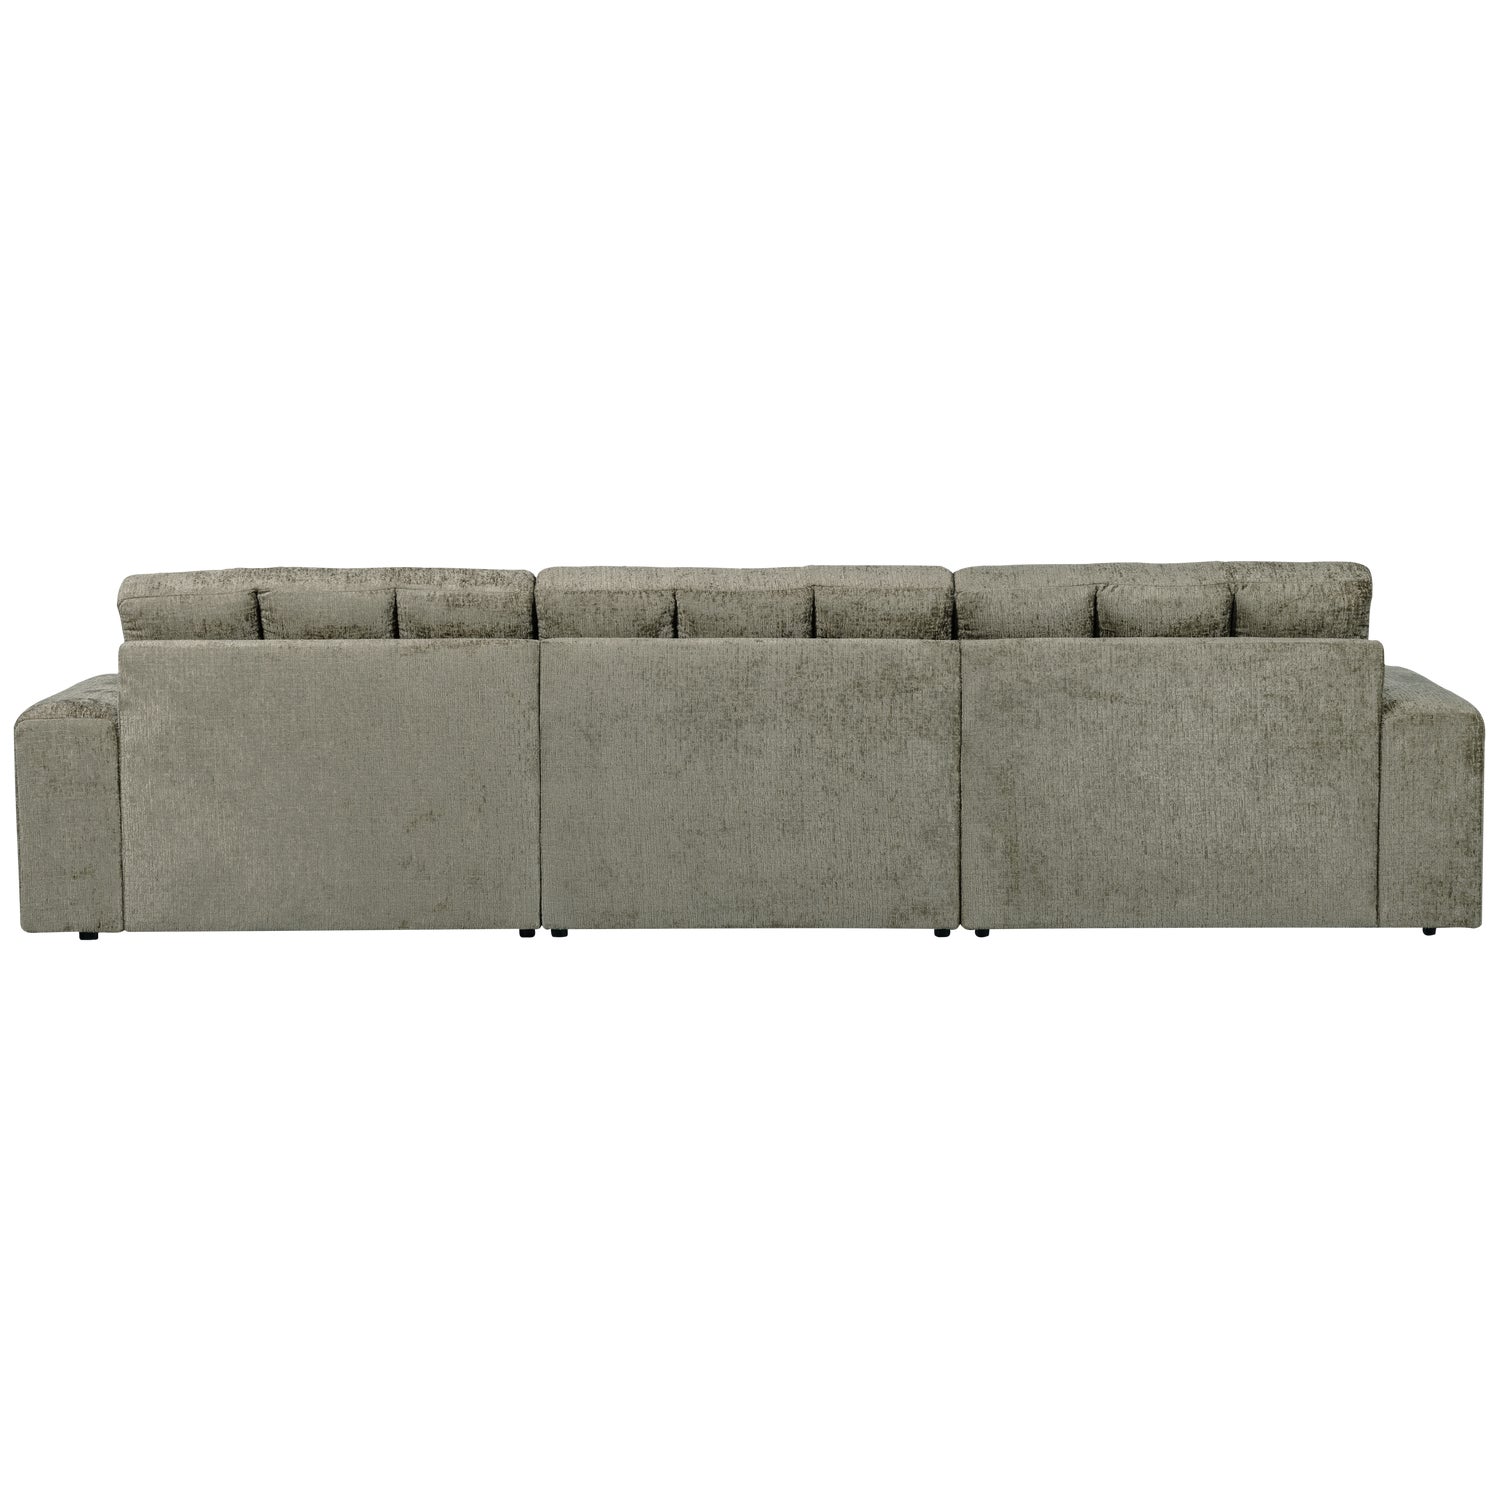 379012-FR-04_VS_WE_Second_date_chaise_longue_links_structure_velvet_frost_AK1.png?auto=webp&format=png&width=1500&height=1500